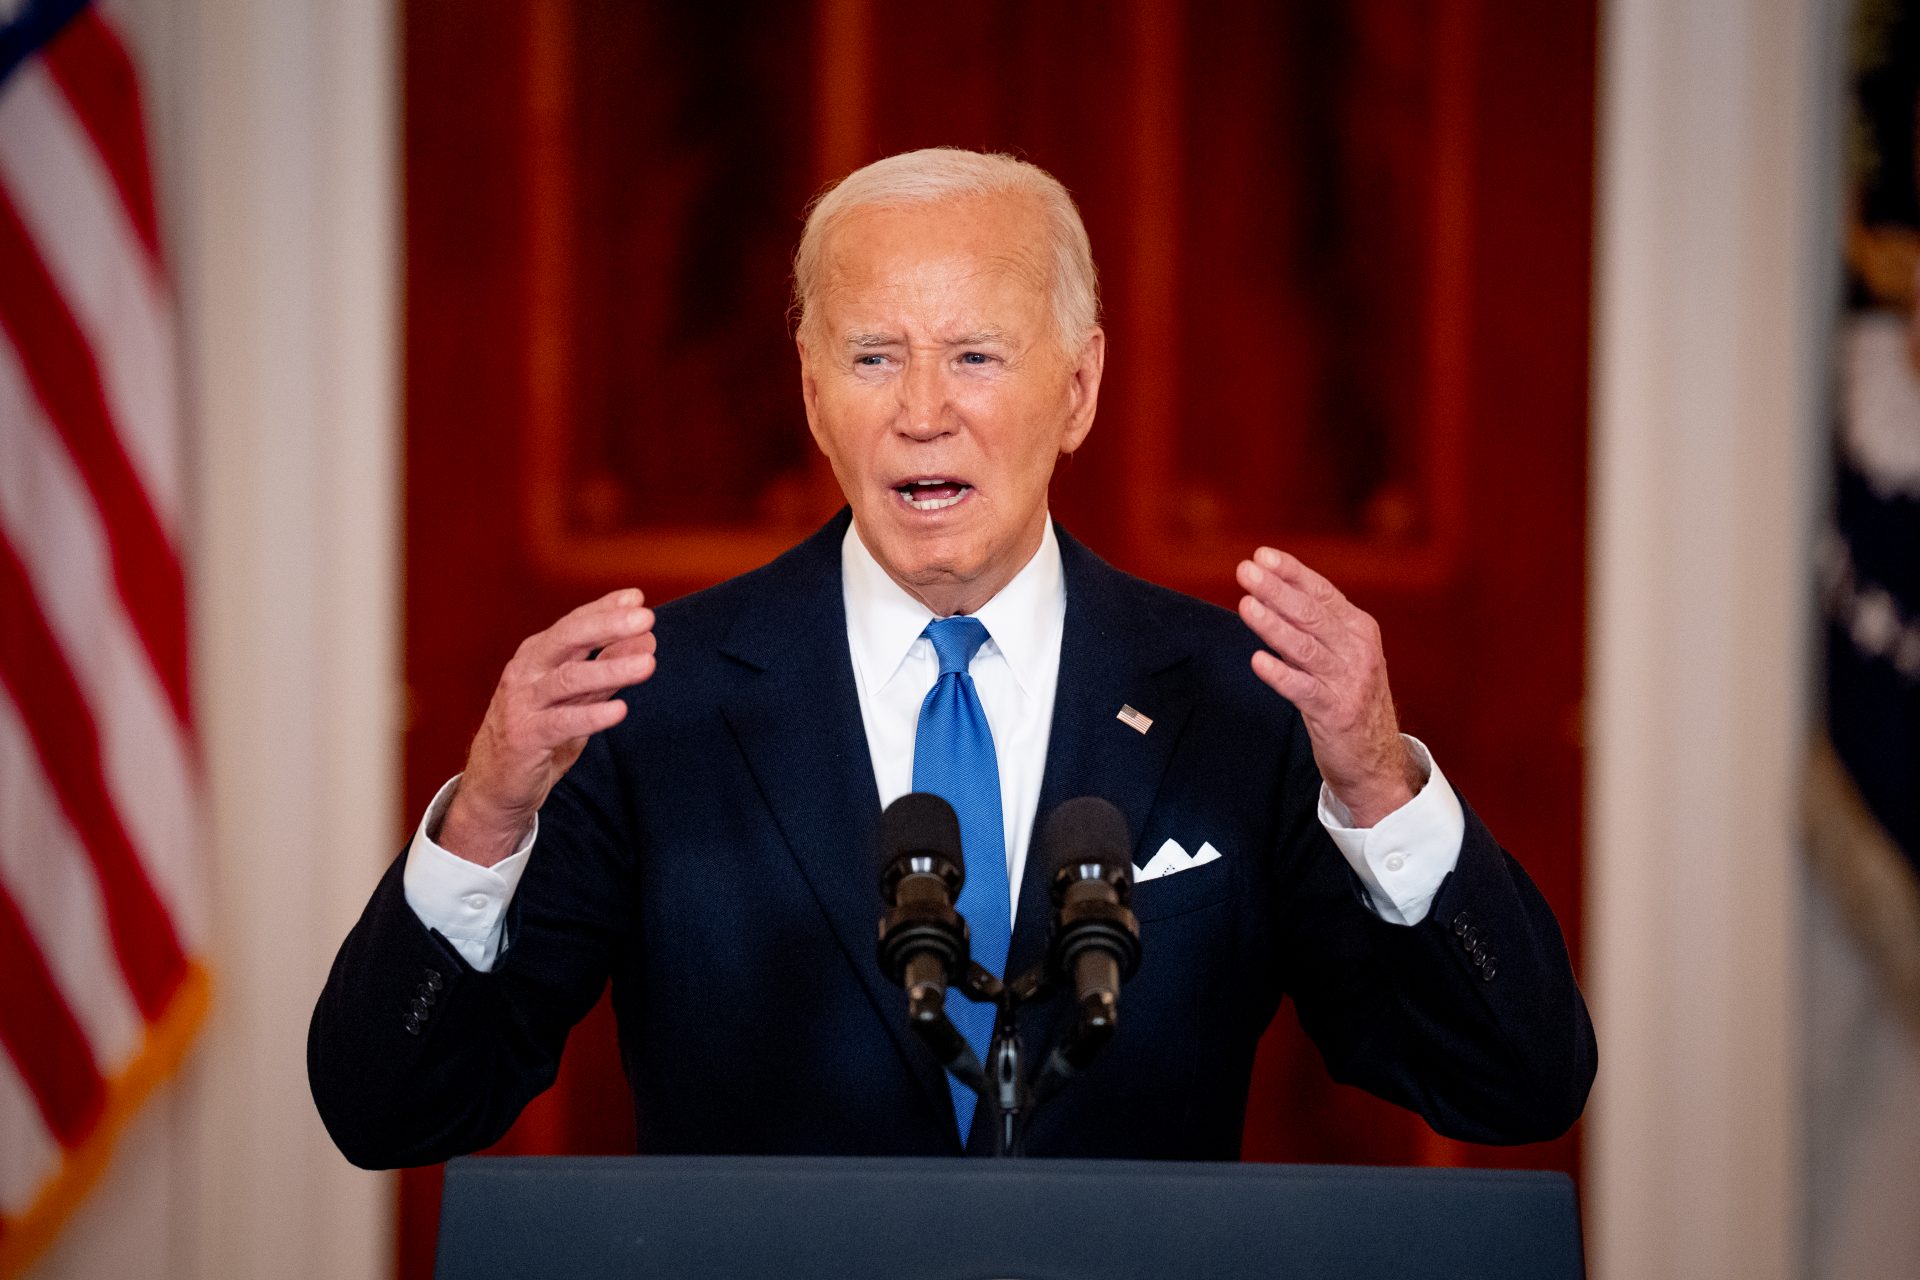 Biden’s plan is bold but so his challenges are big